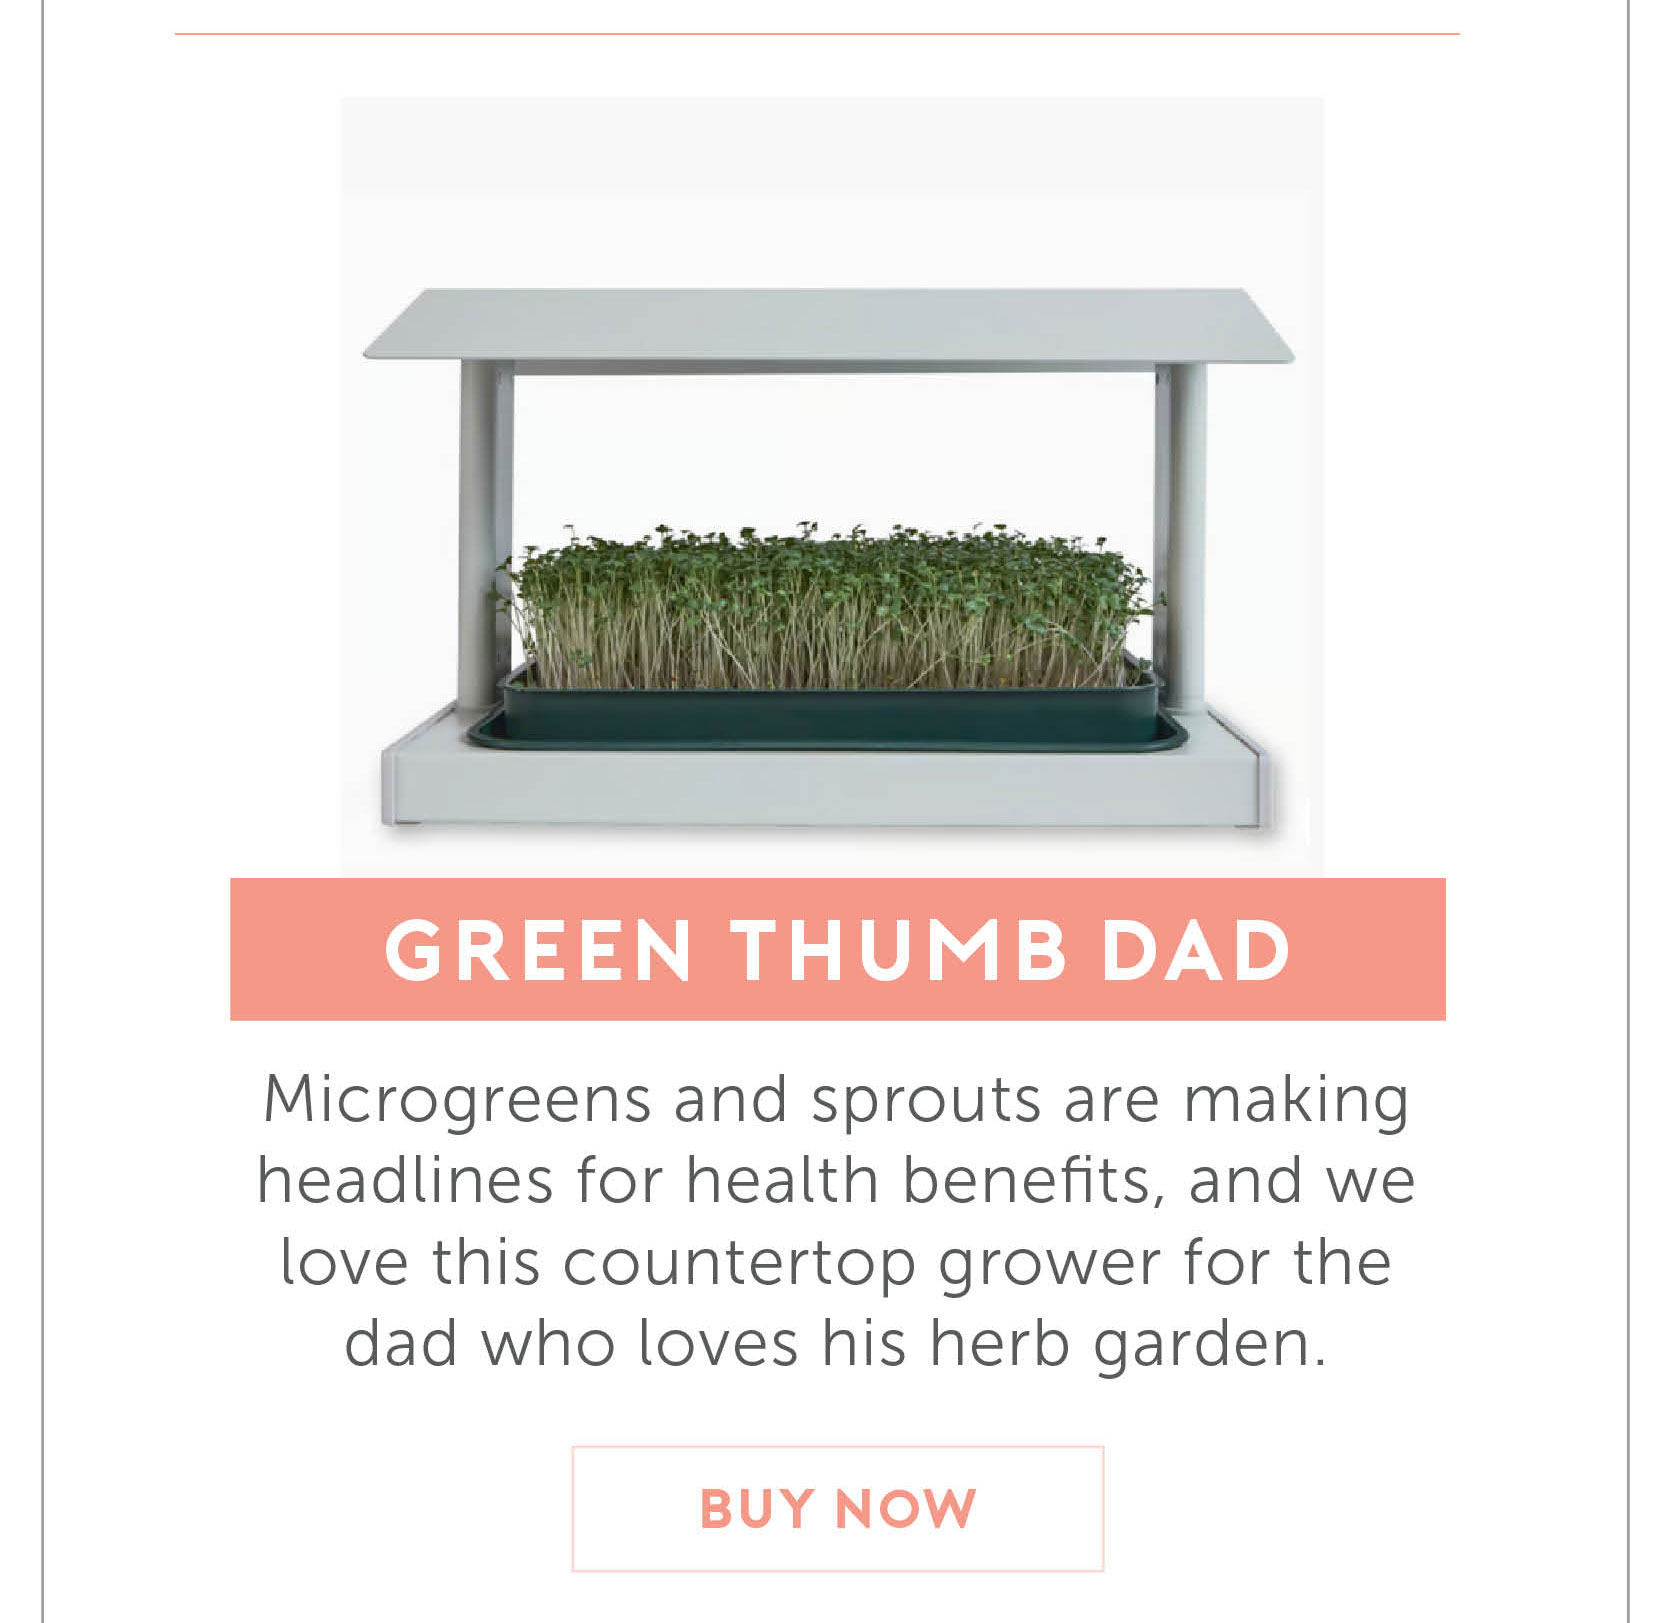 For the Dad with A Green Thumb. Microgreens and sprouts are making headlines for health benefits, and we love this countertop grower for the dad who loves his herb garden.